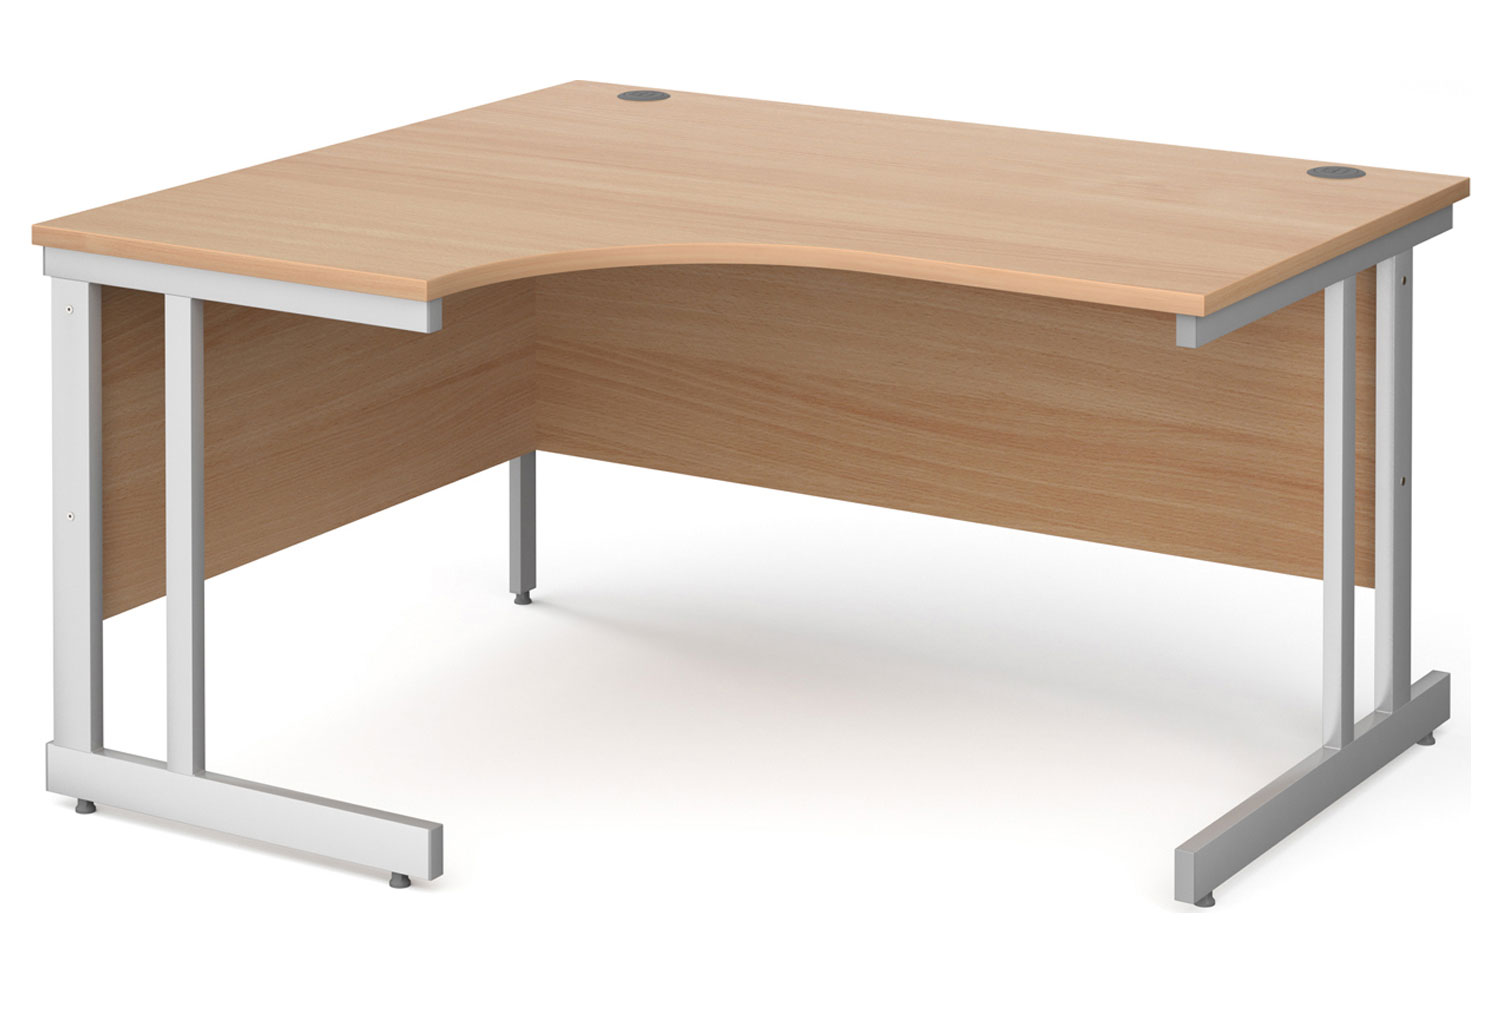 Tully II Left Hand Ergonomic Office Desk, 140wx120/80dx73h (cm), Beech, Express Delivery